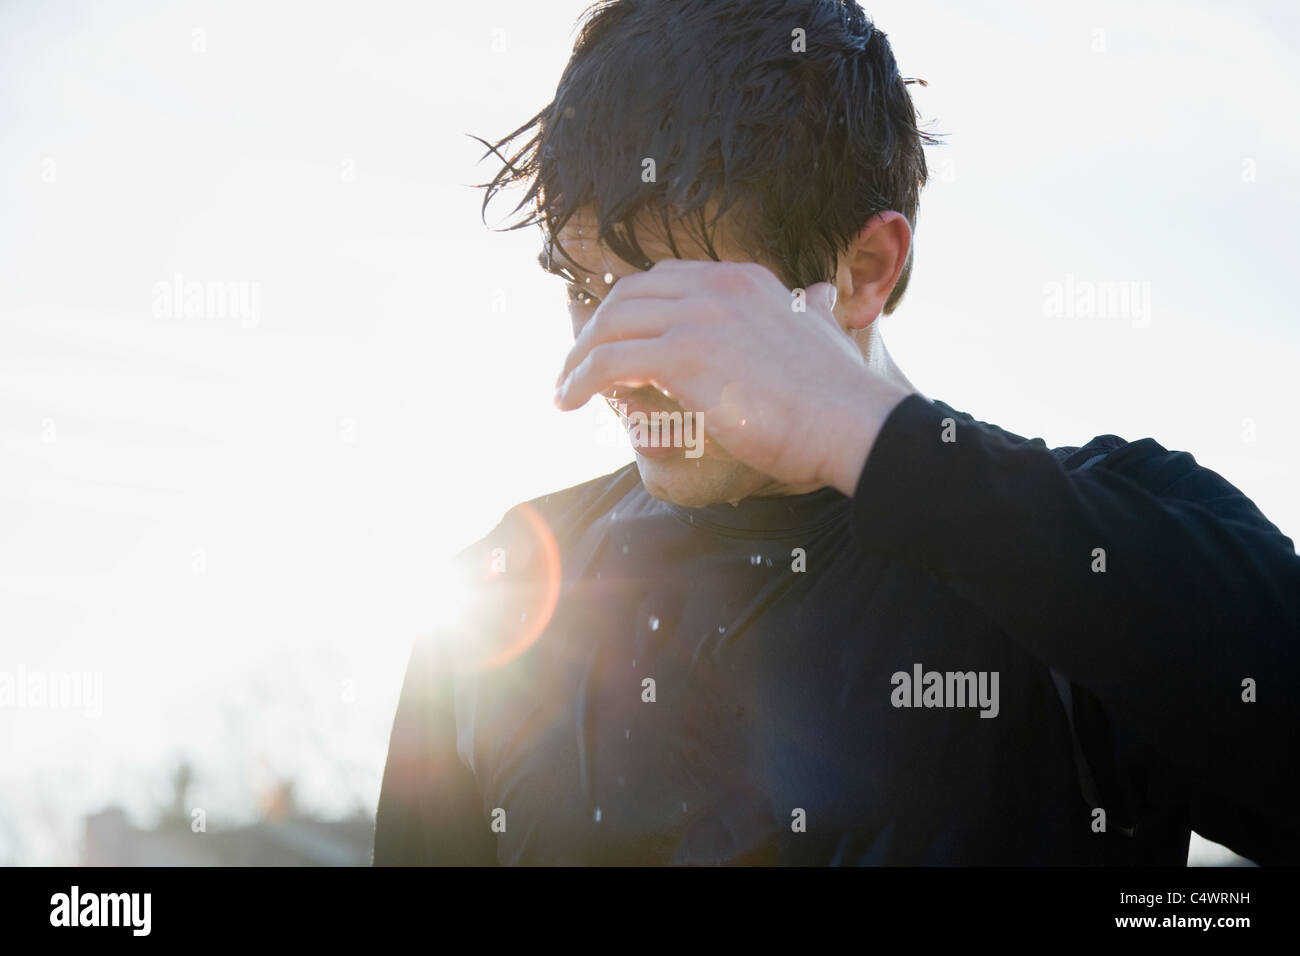 USA, Michigan, man in sports clothing back lit by sun Stock Photo